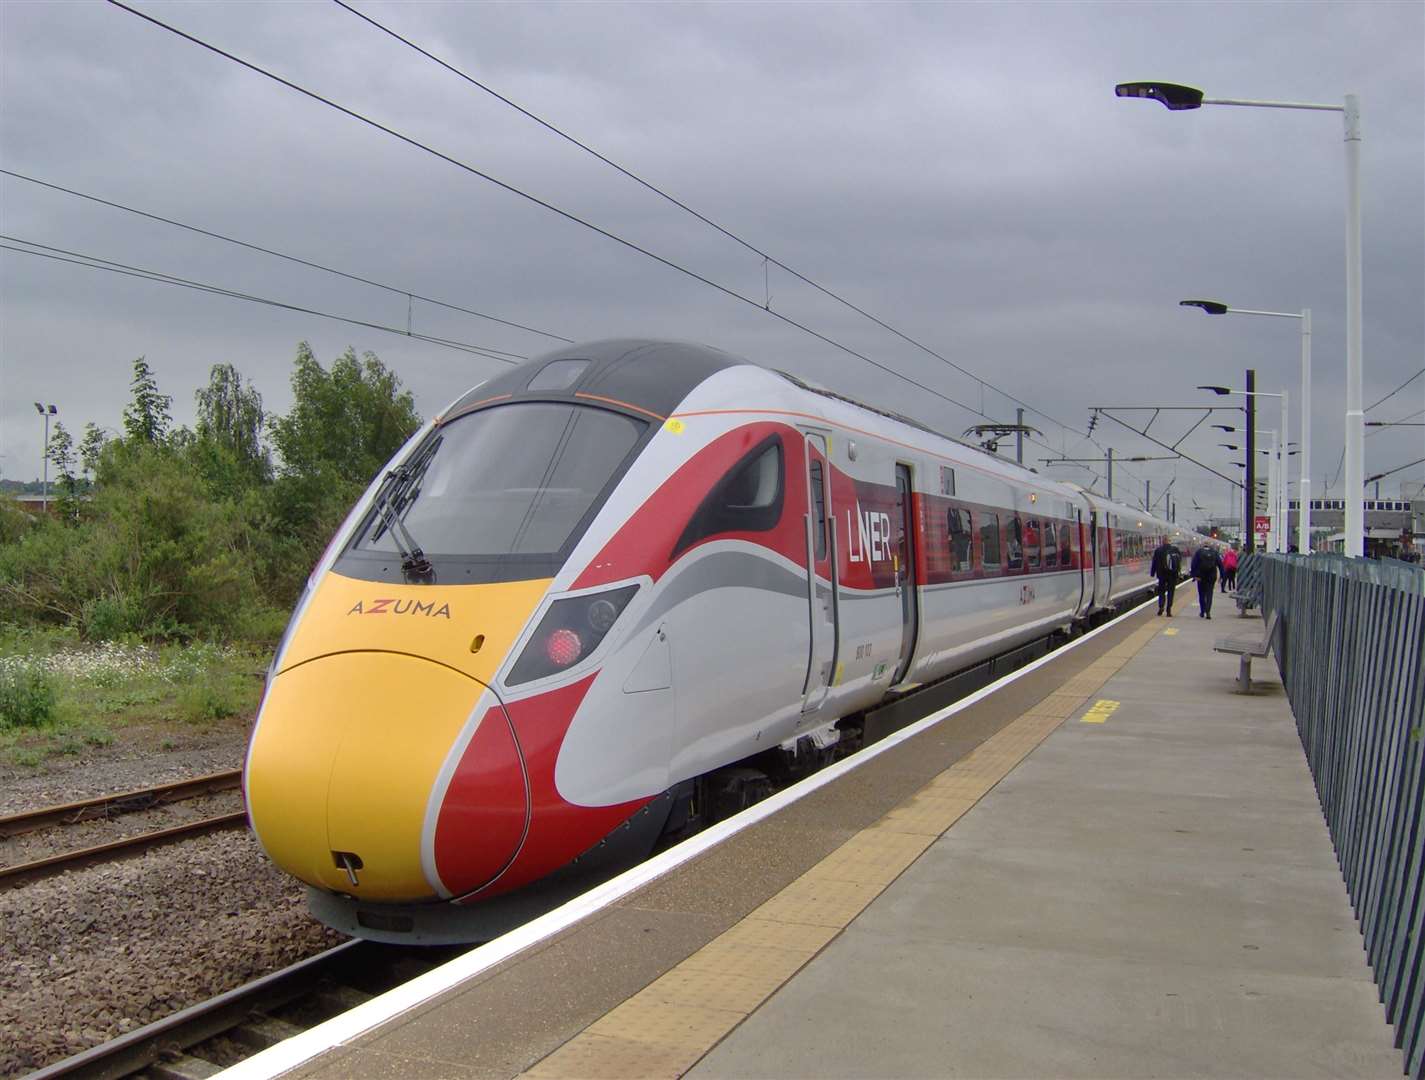 The Azuma train's introduction will be the start of a new era on the East Coast line.